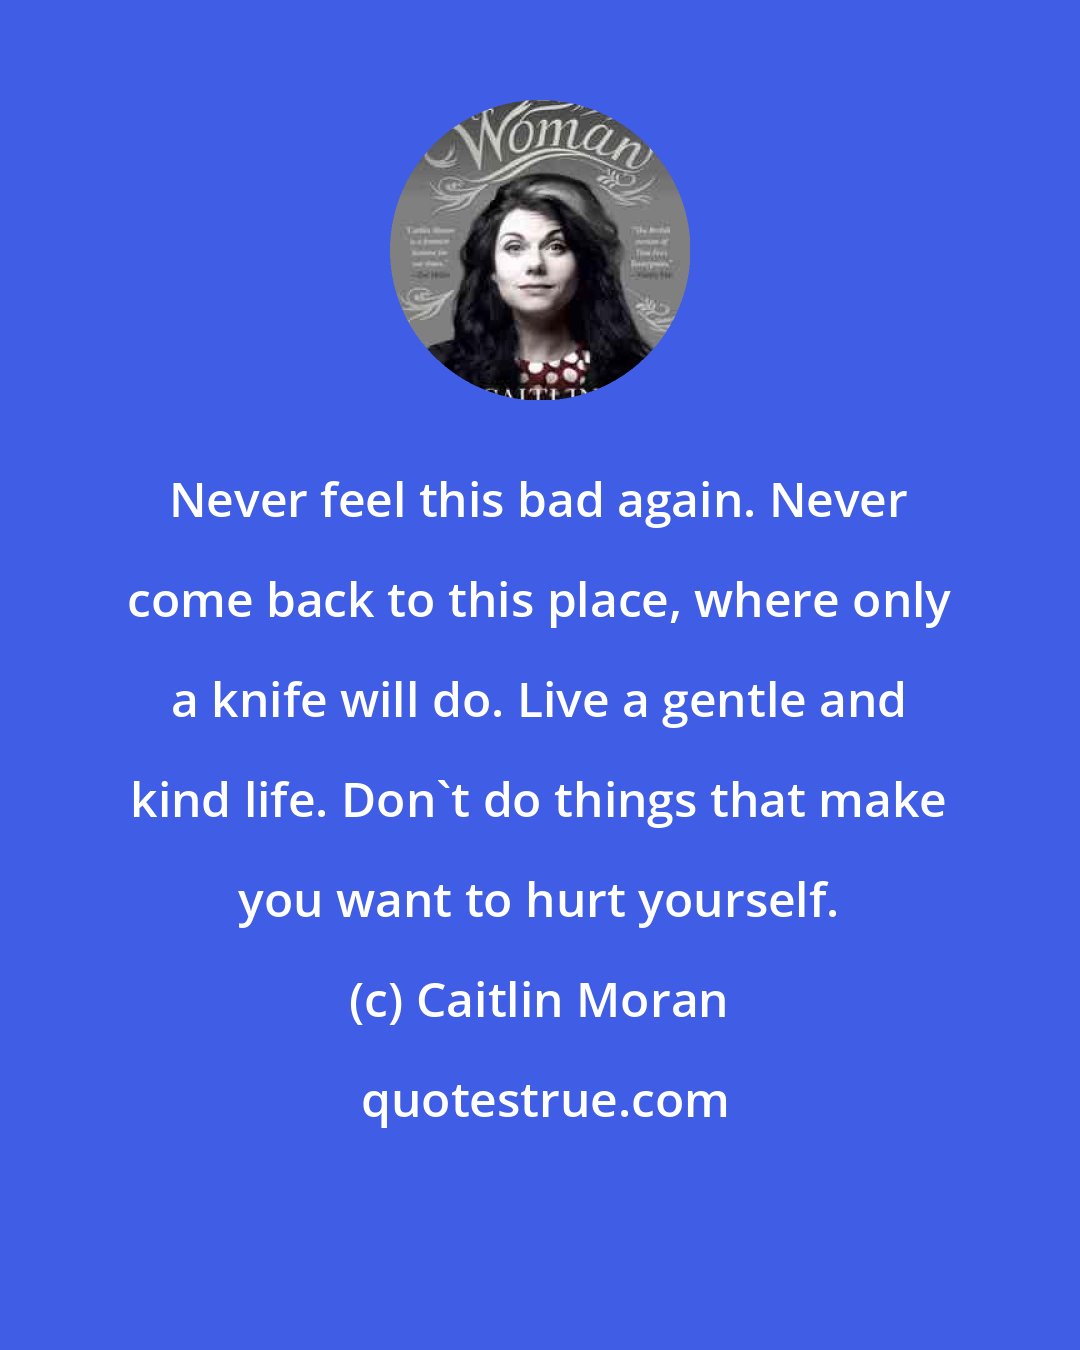 Caitlin Moran: Never feel this bad again. Never come back to this place, where only a knife will do. Live a gentle and kind life. Don't do things that make you want to hurt yourself.